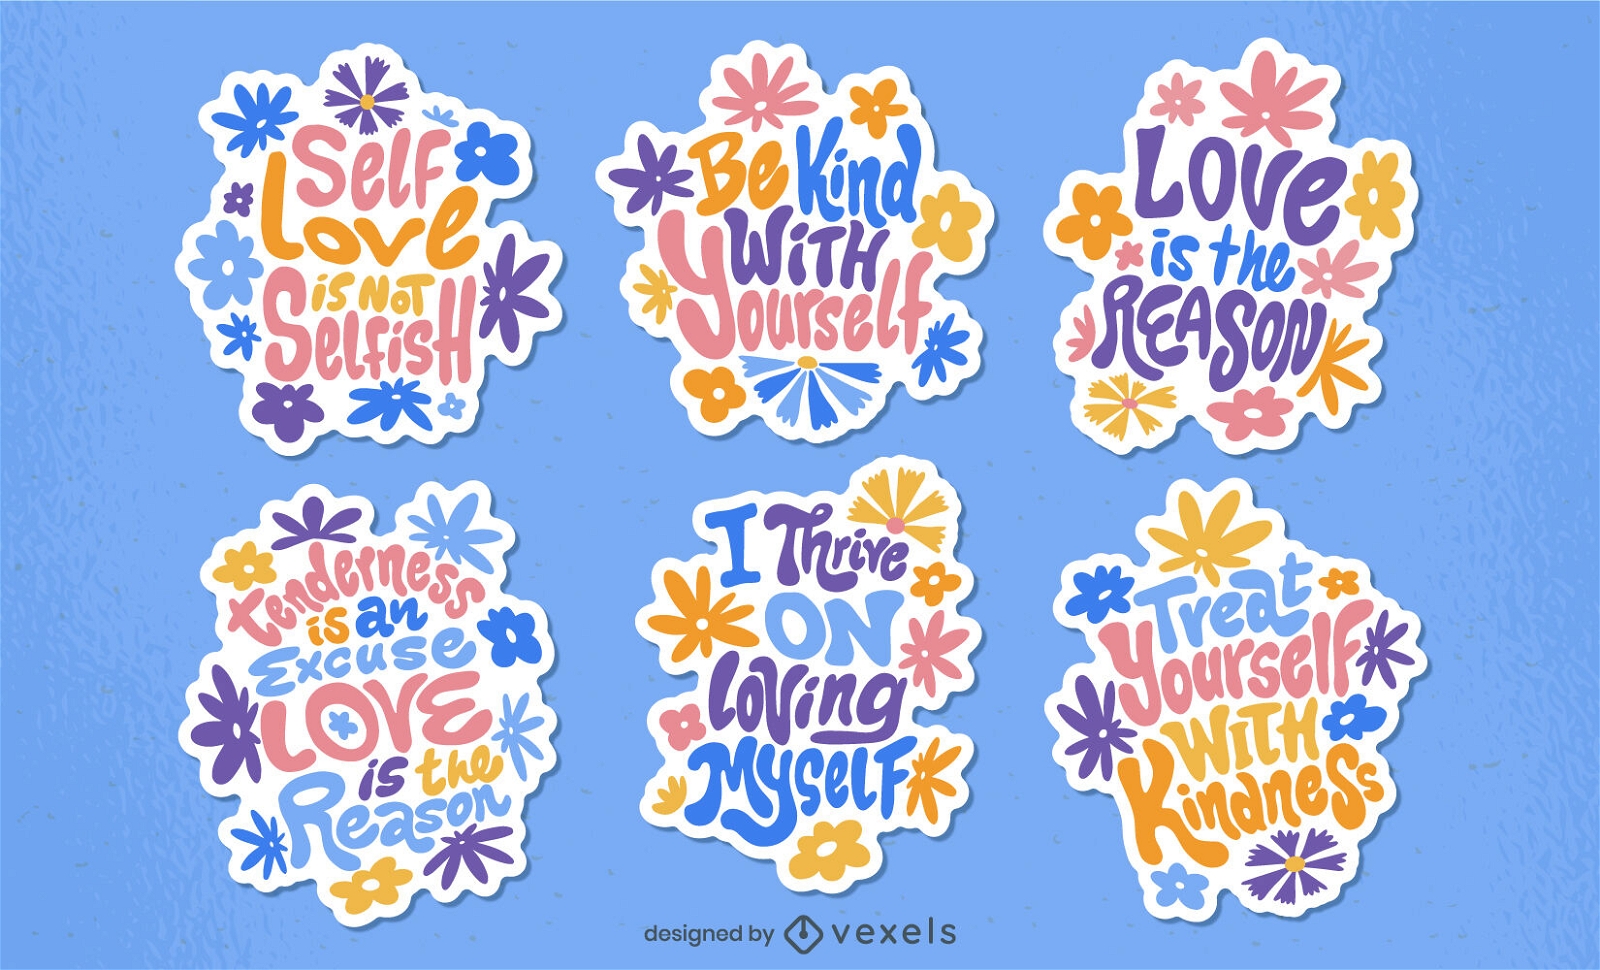 Self love quotes stickers set